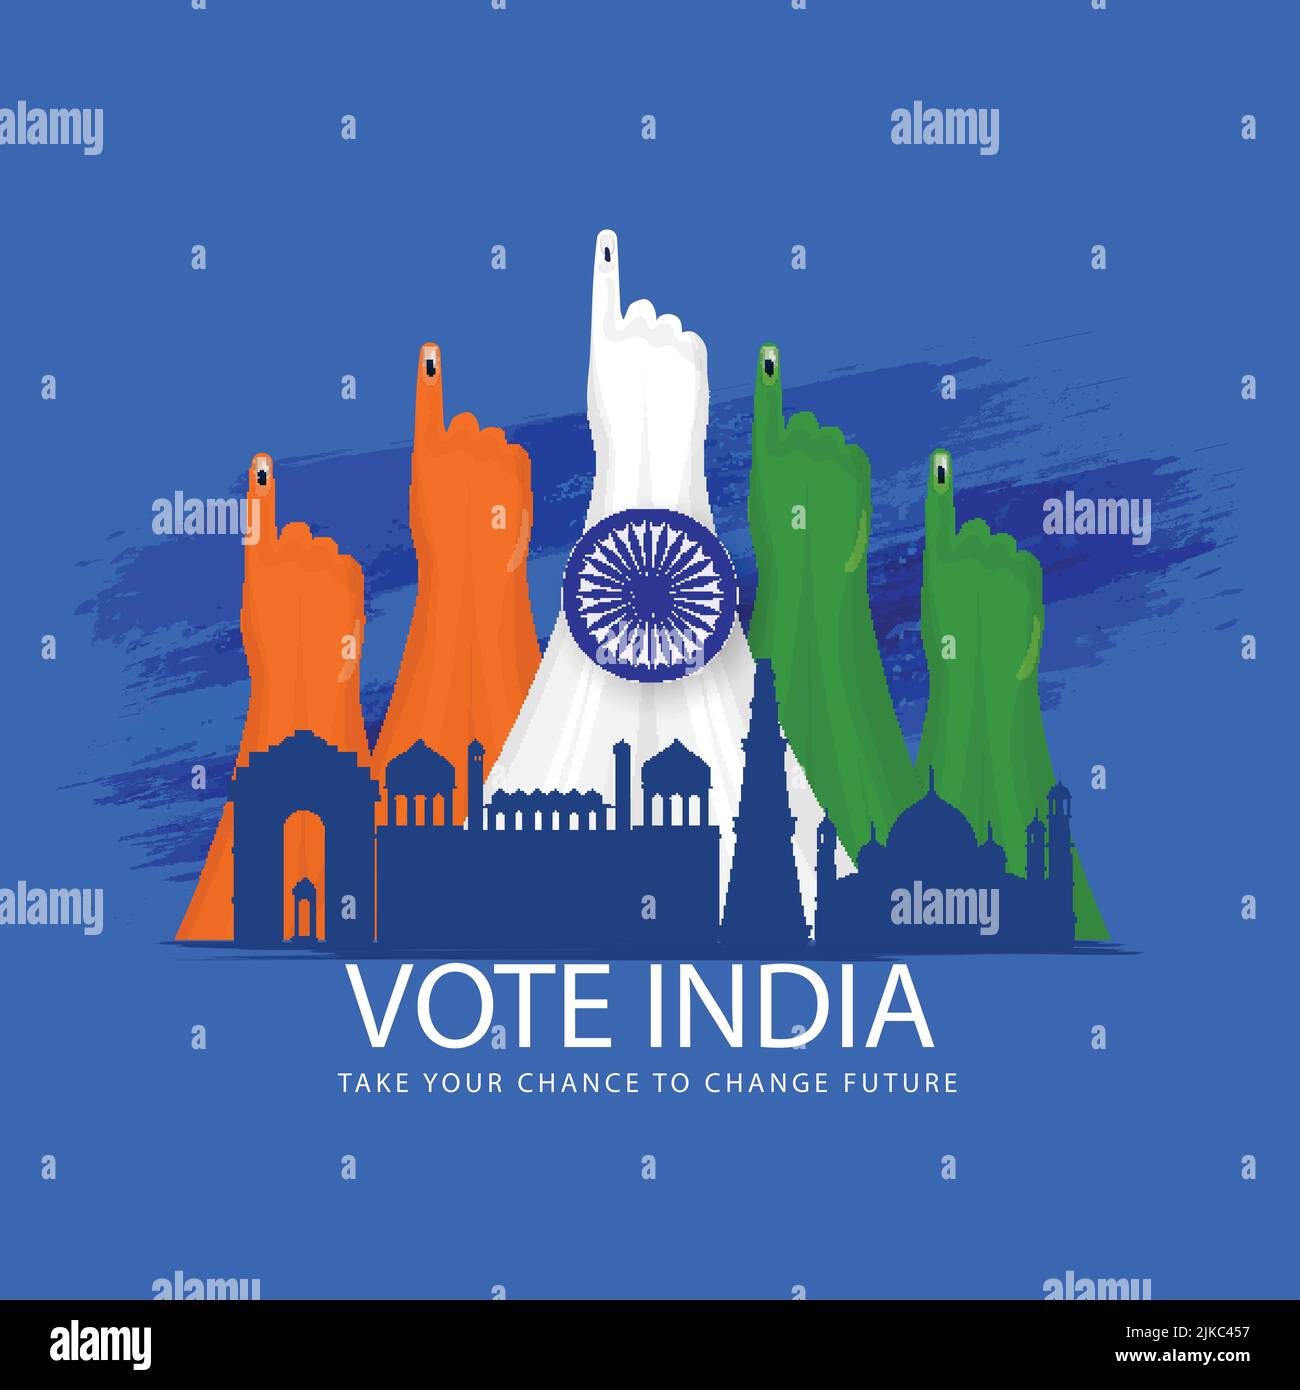 Vote Of India Poster Design With Silhouette Famous Monuments, Ashoka Wheel And Tricolor Voter Hands On Blue Brush Effect Background. Stock Vector